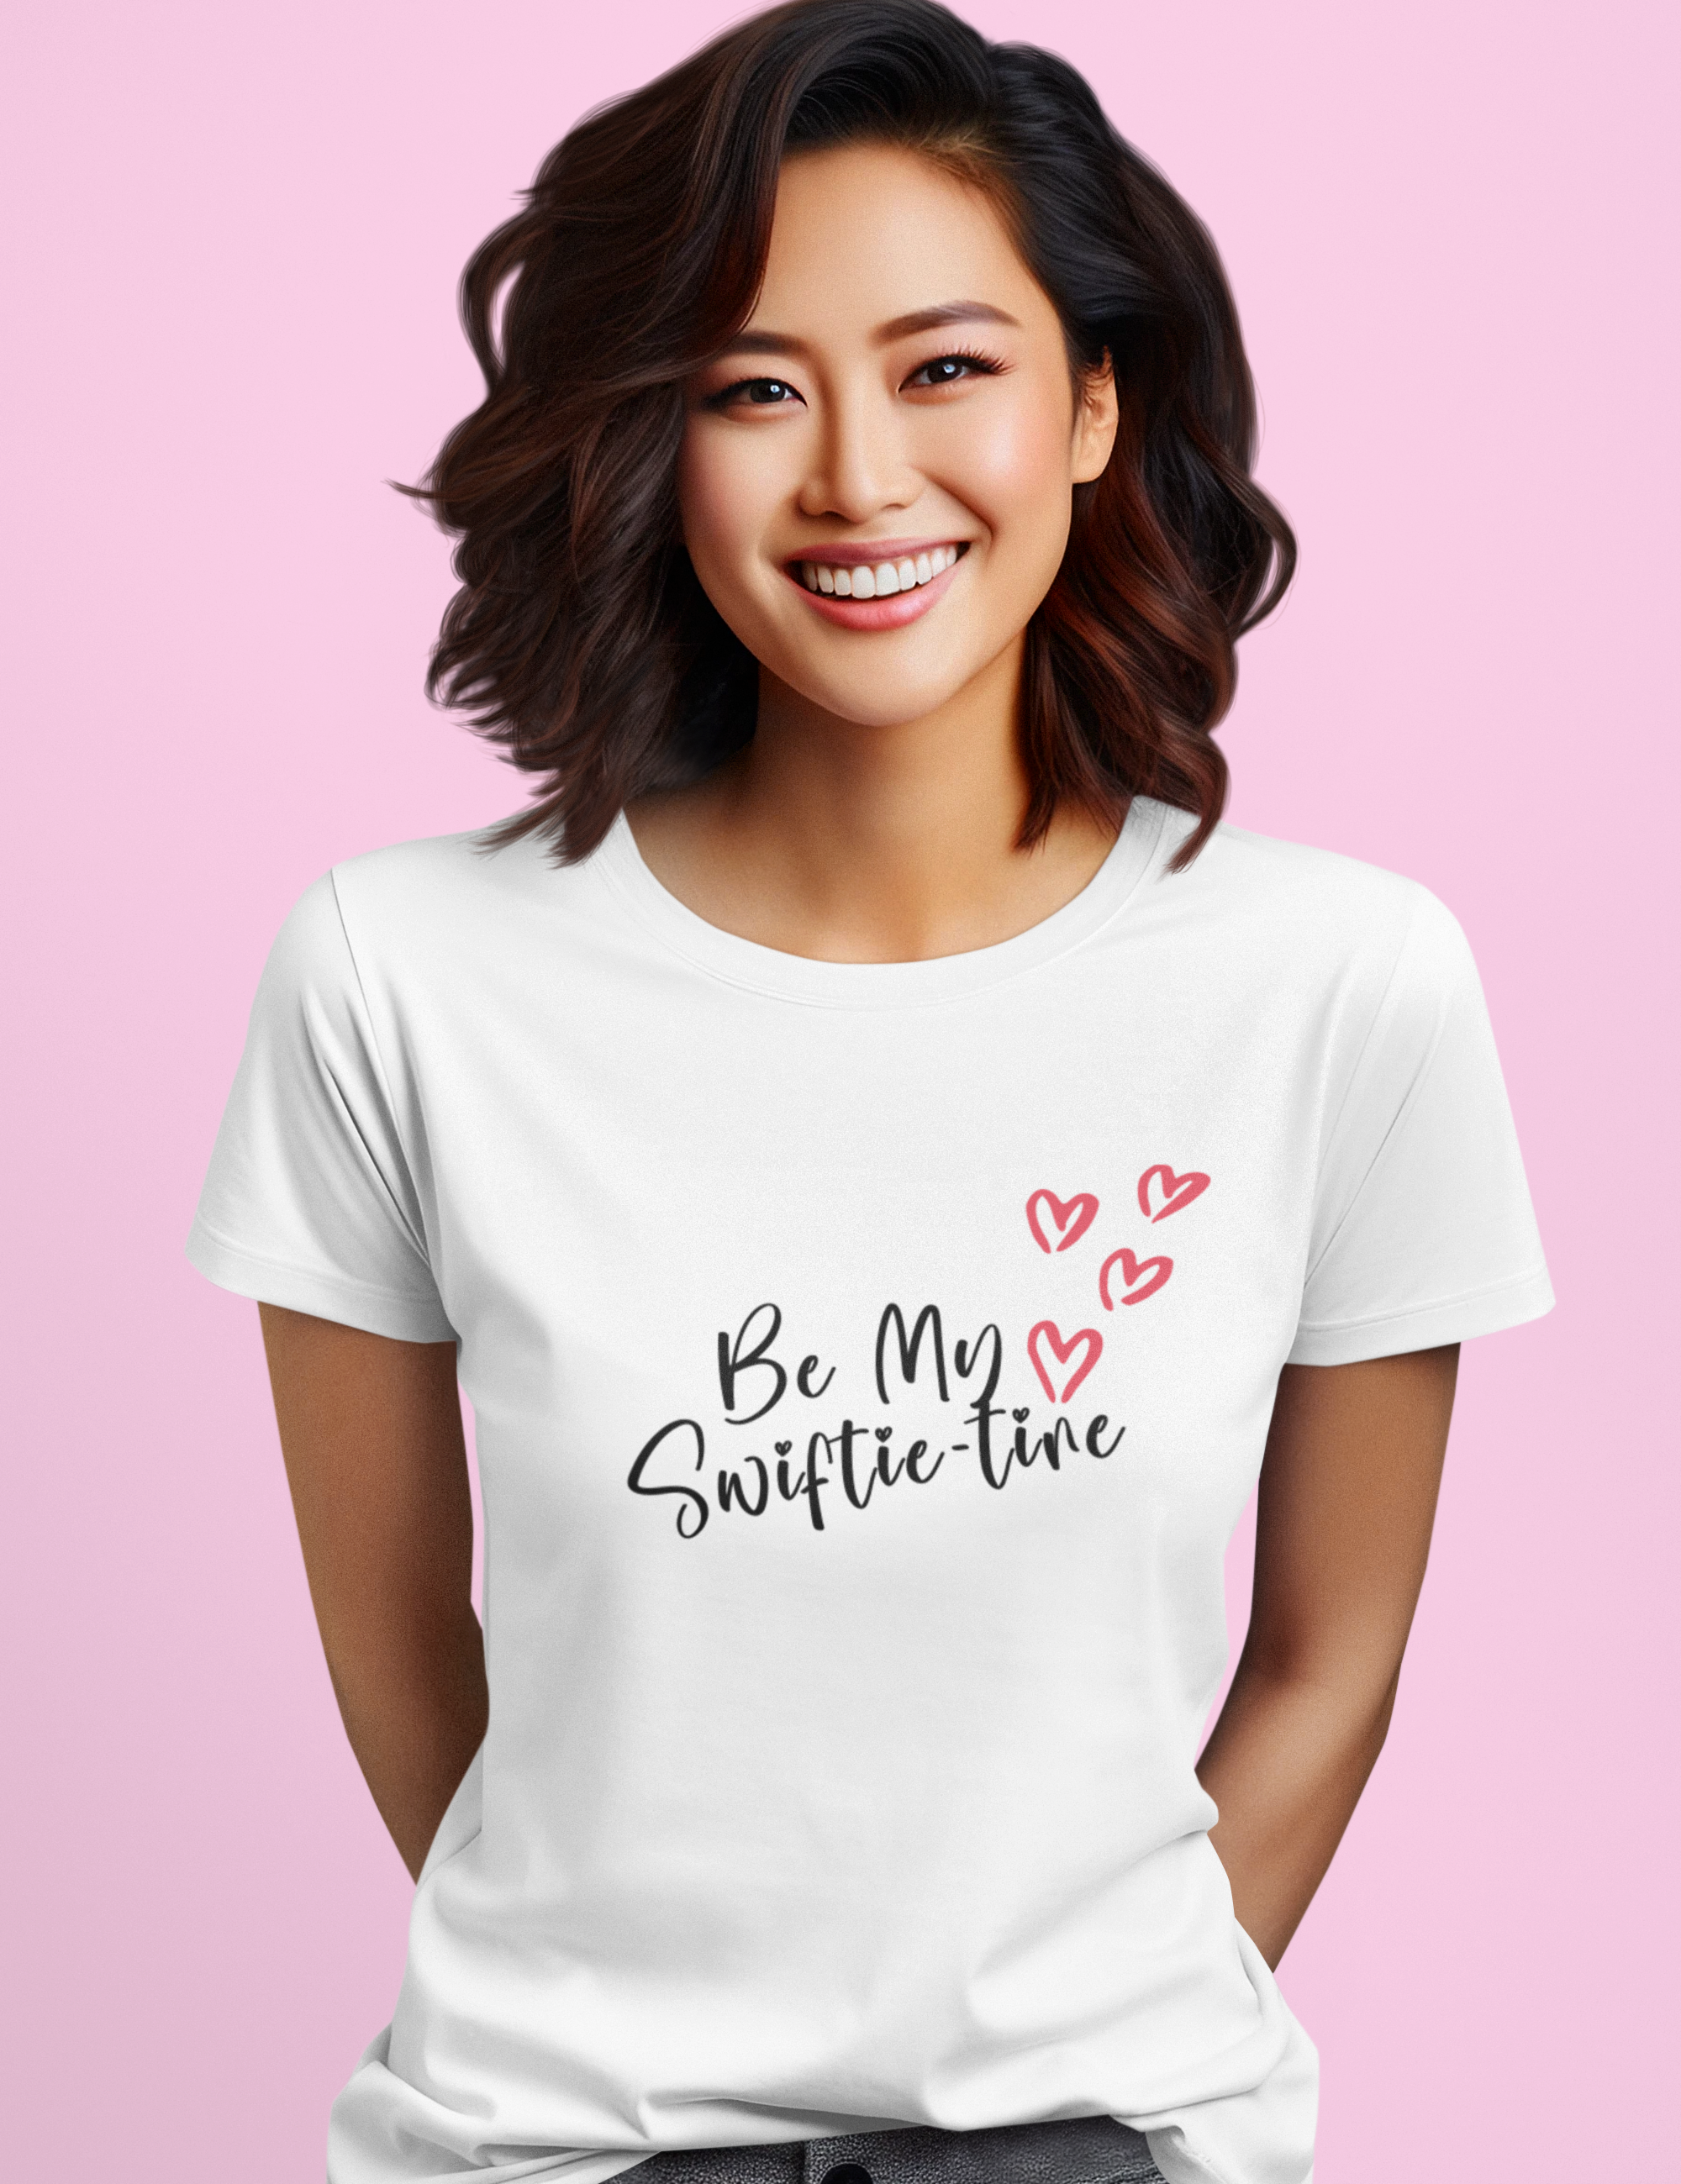 round-neck-t-shirt-mockup-featuring-an-ai-generated-cheerful-woman-for-women-s-day-m37362.png